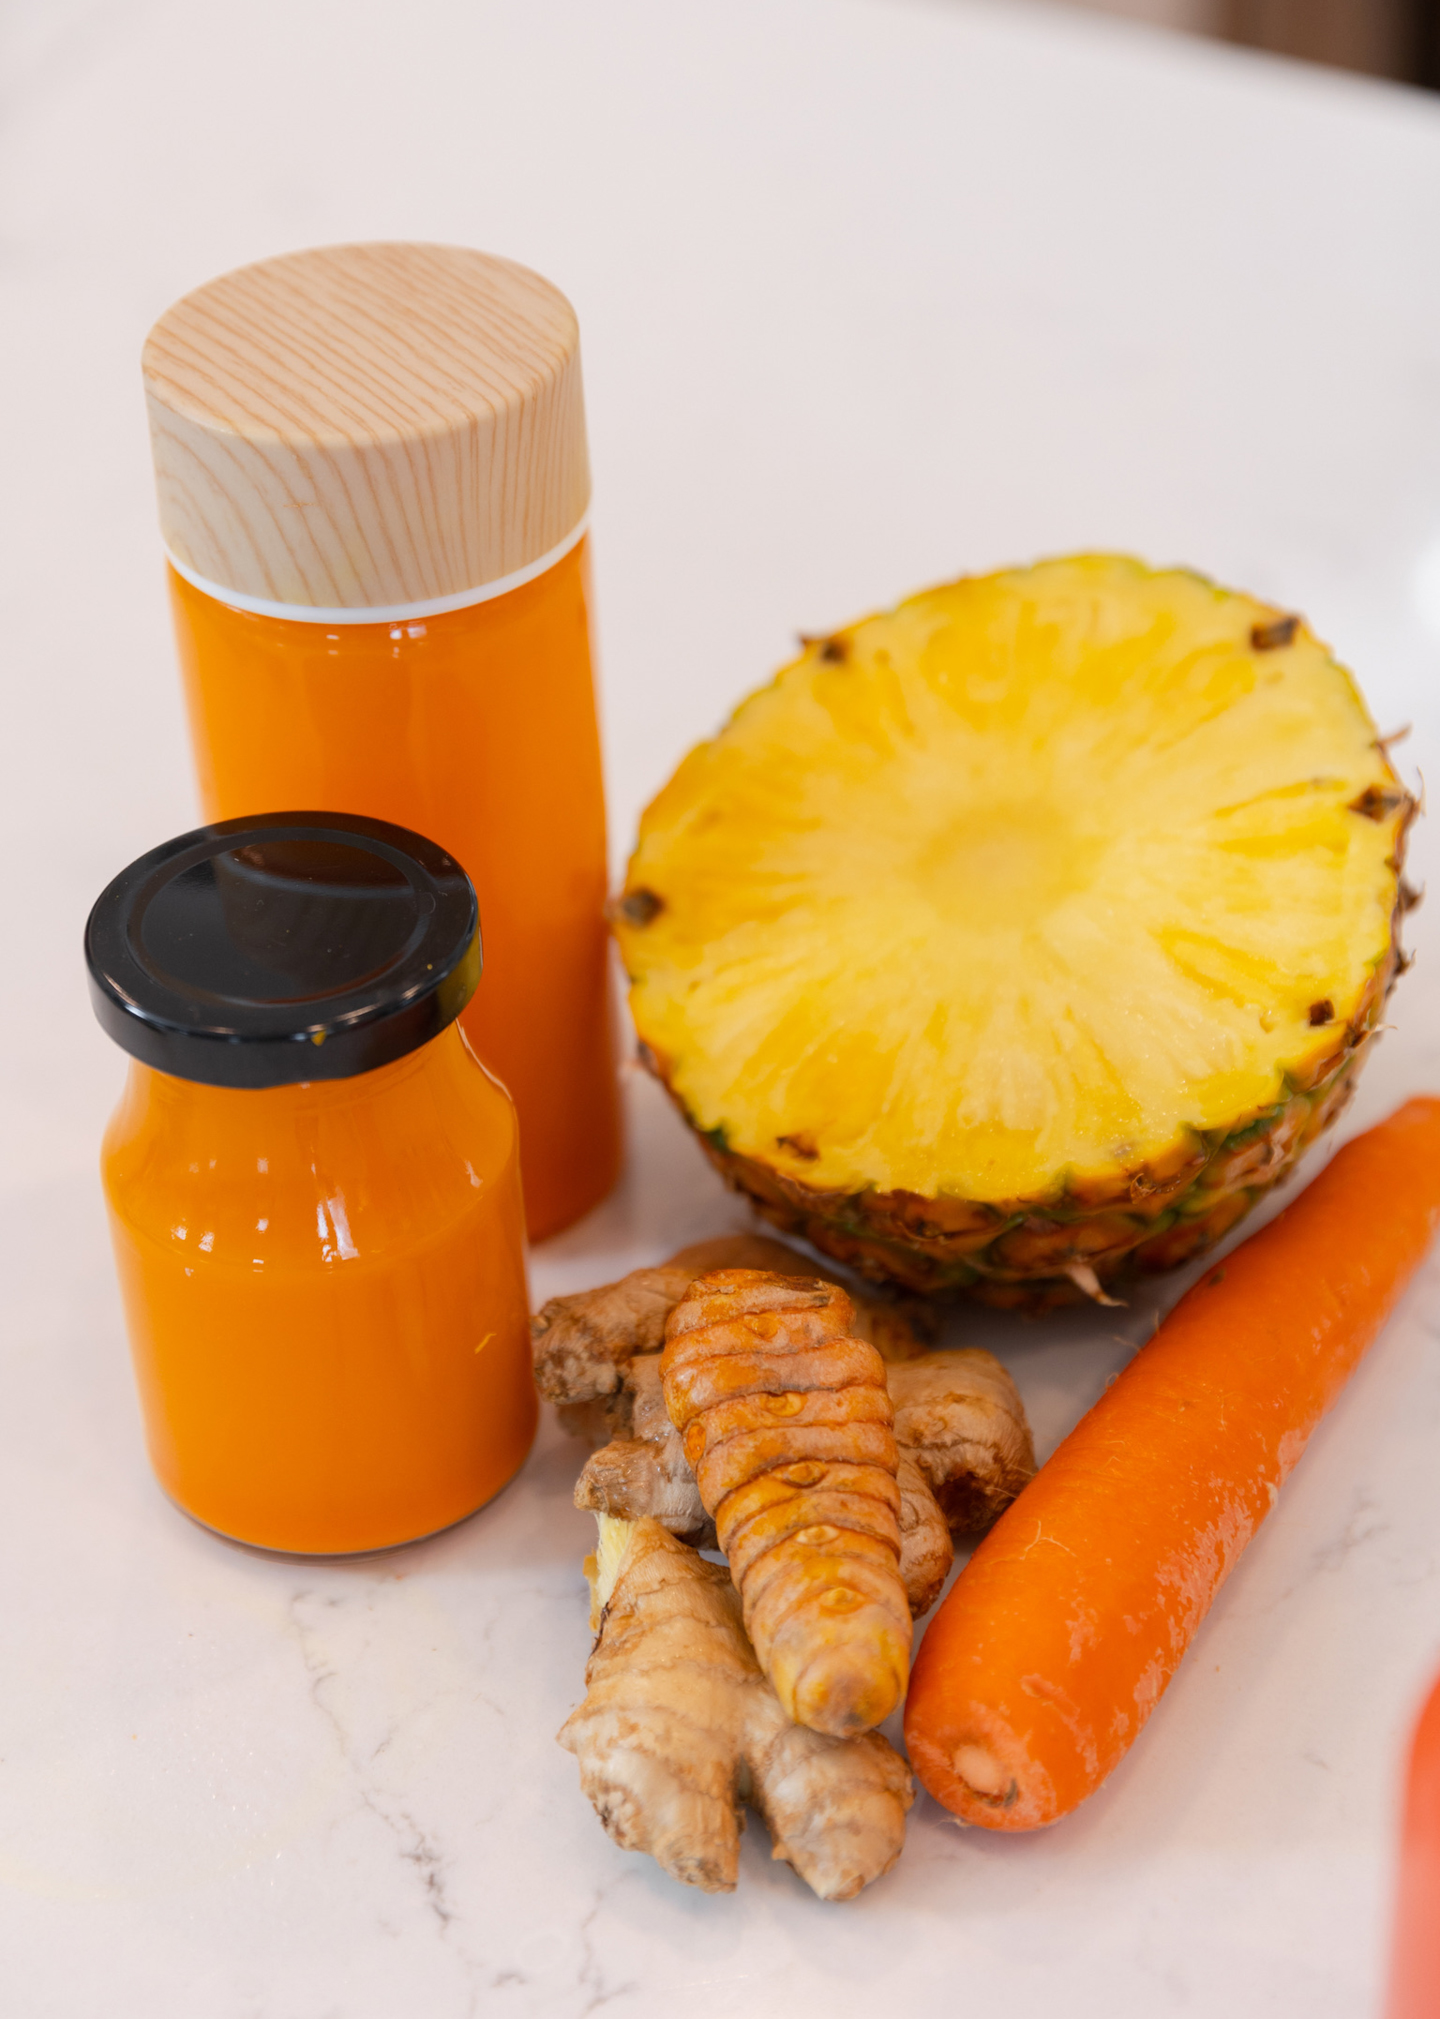 pineapple, carrot and ginger juice in a jar